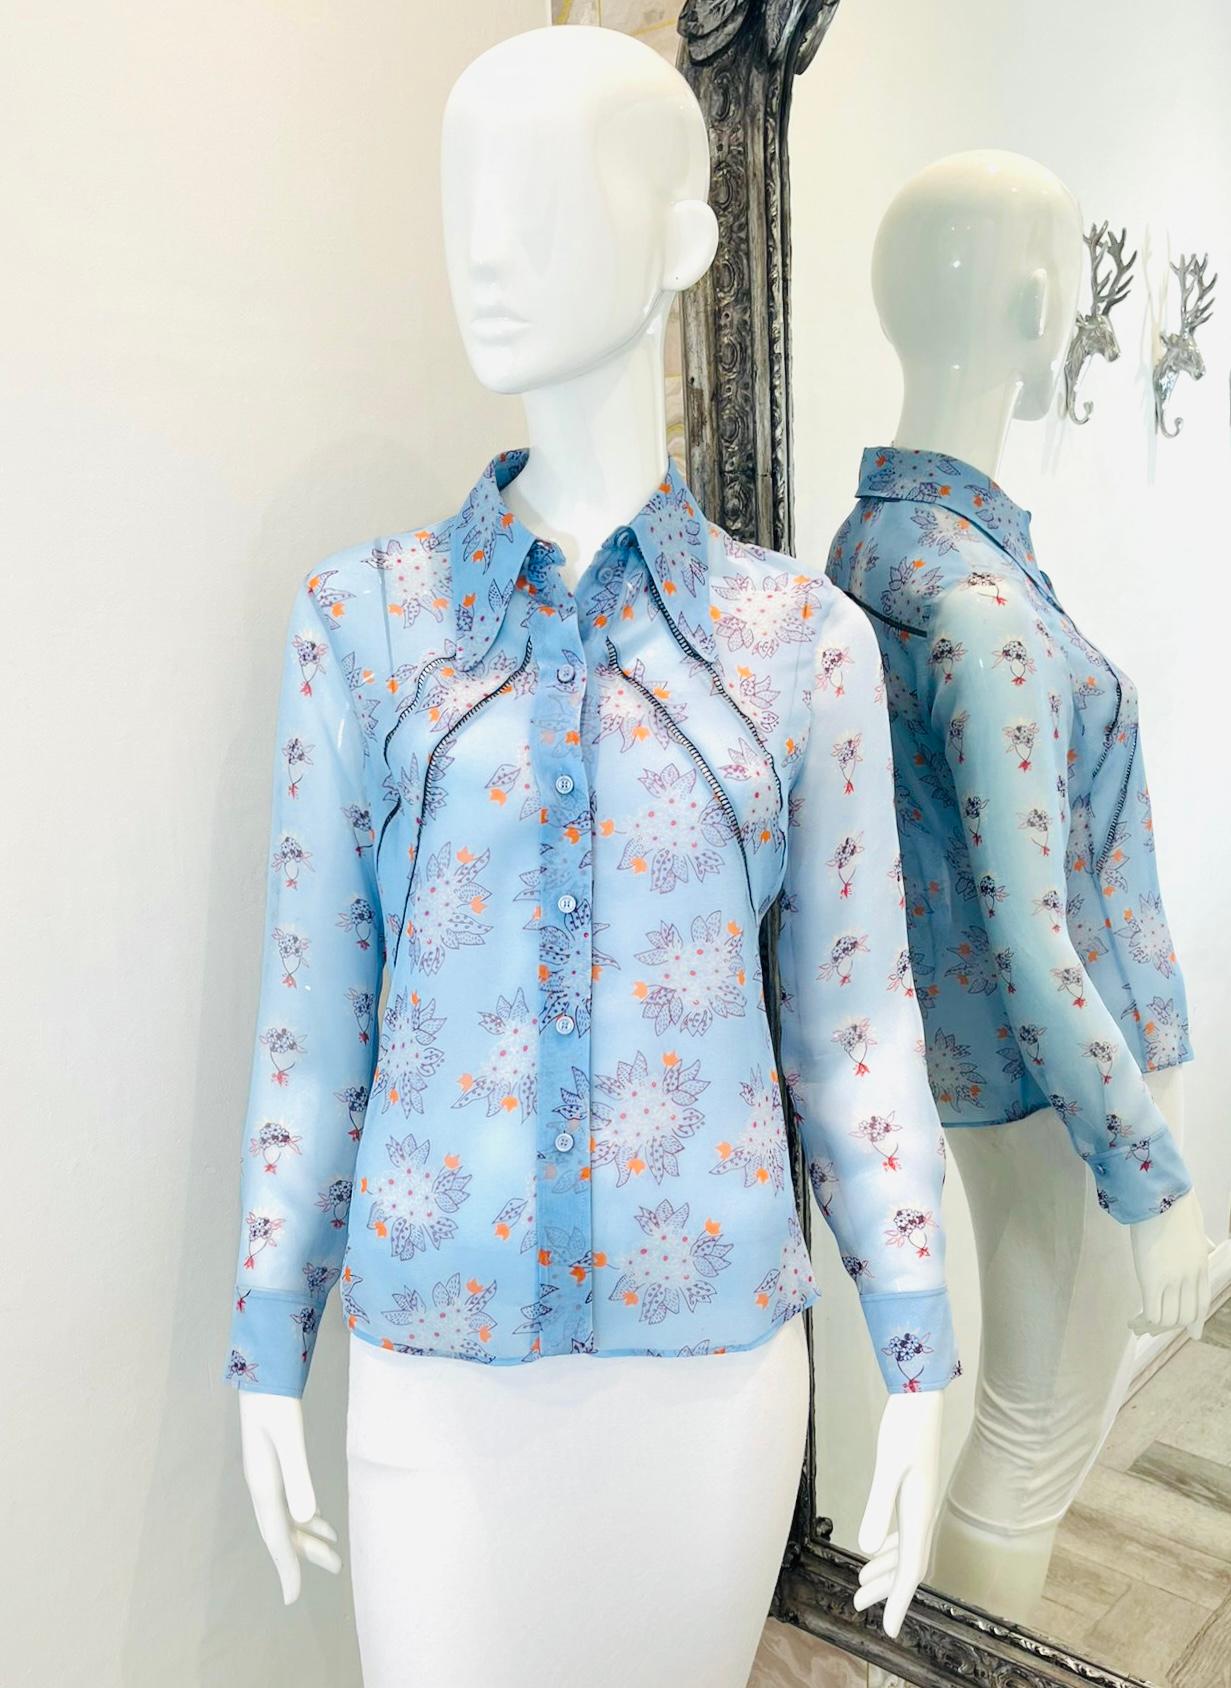 Chloe Floral Silk Shirt

Blue semi-sheer shirt designed with floral graphic prints. 

Detailed with subtle ladder cut-out accents. 

Featuring button centre closure and long sleeves. Rrp £795 

Size – 36FR

Condition – Excellent

Composition – 100%